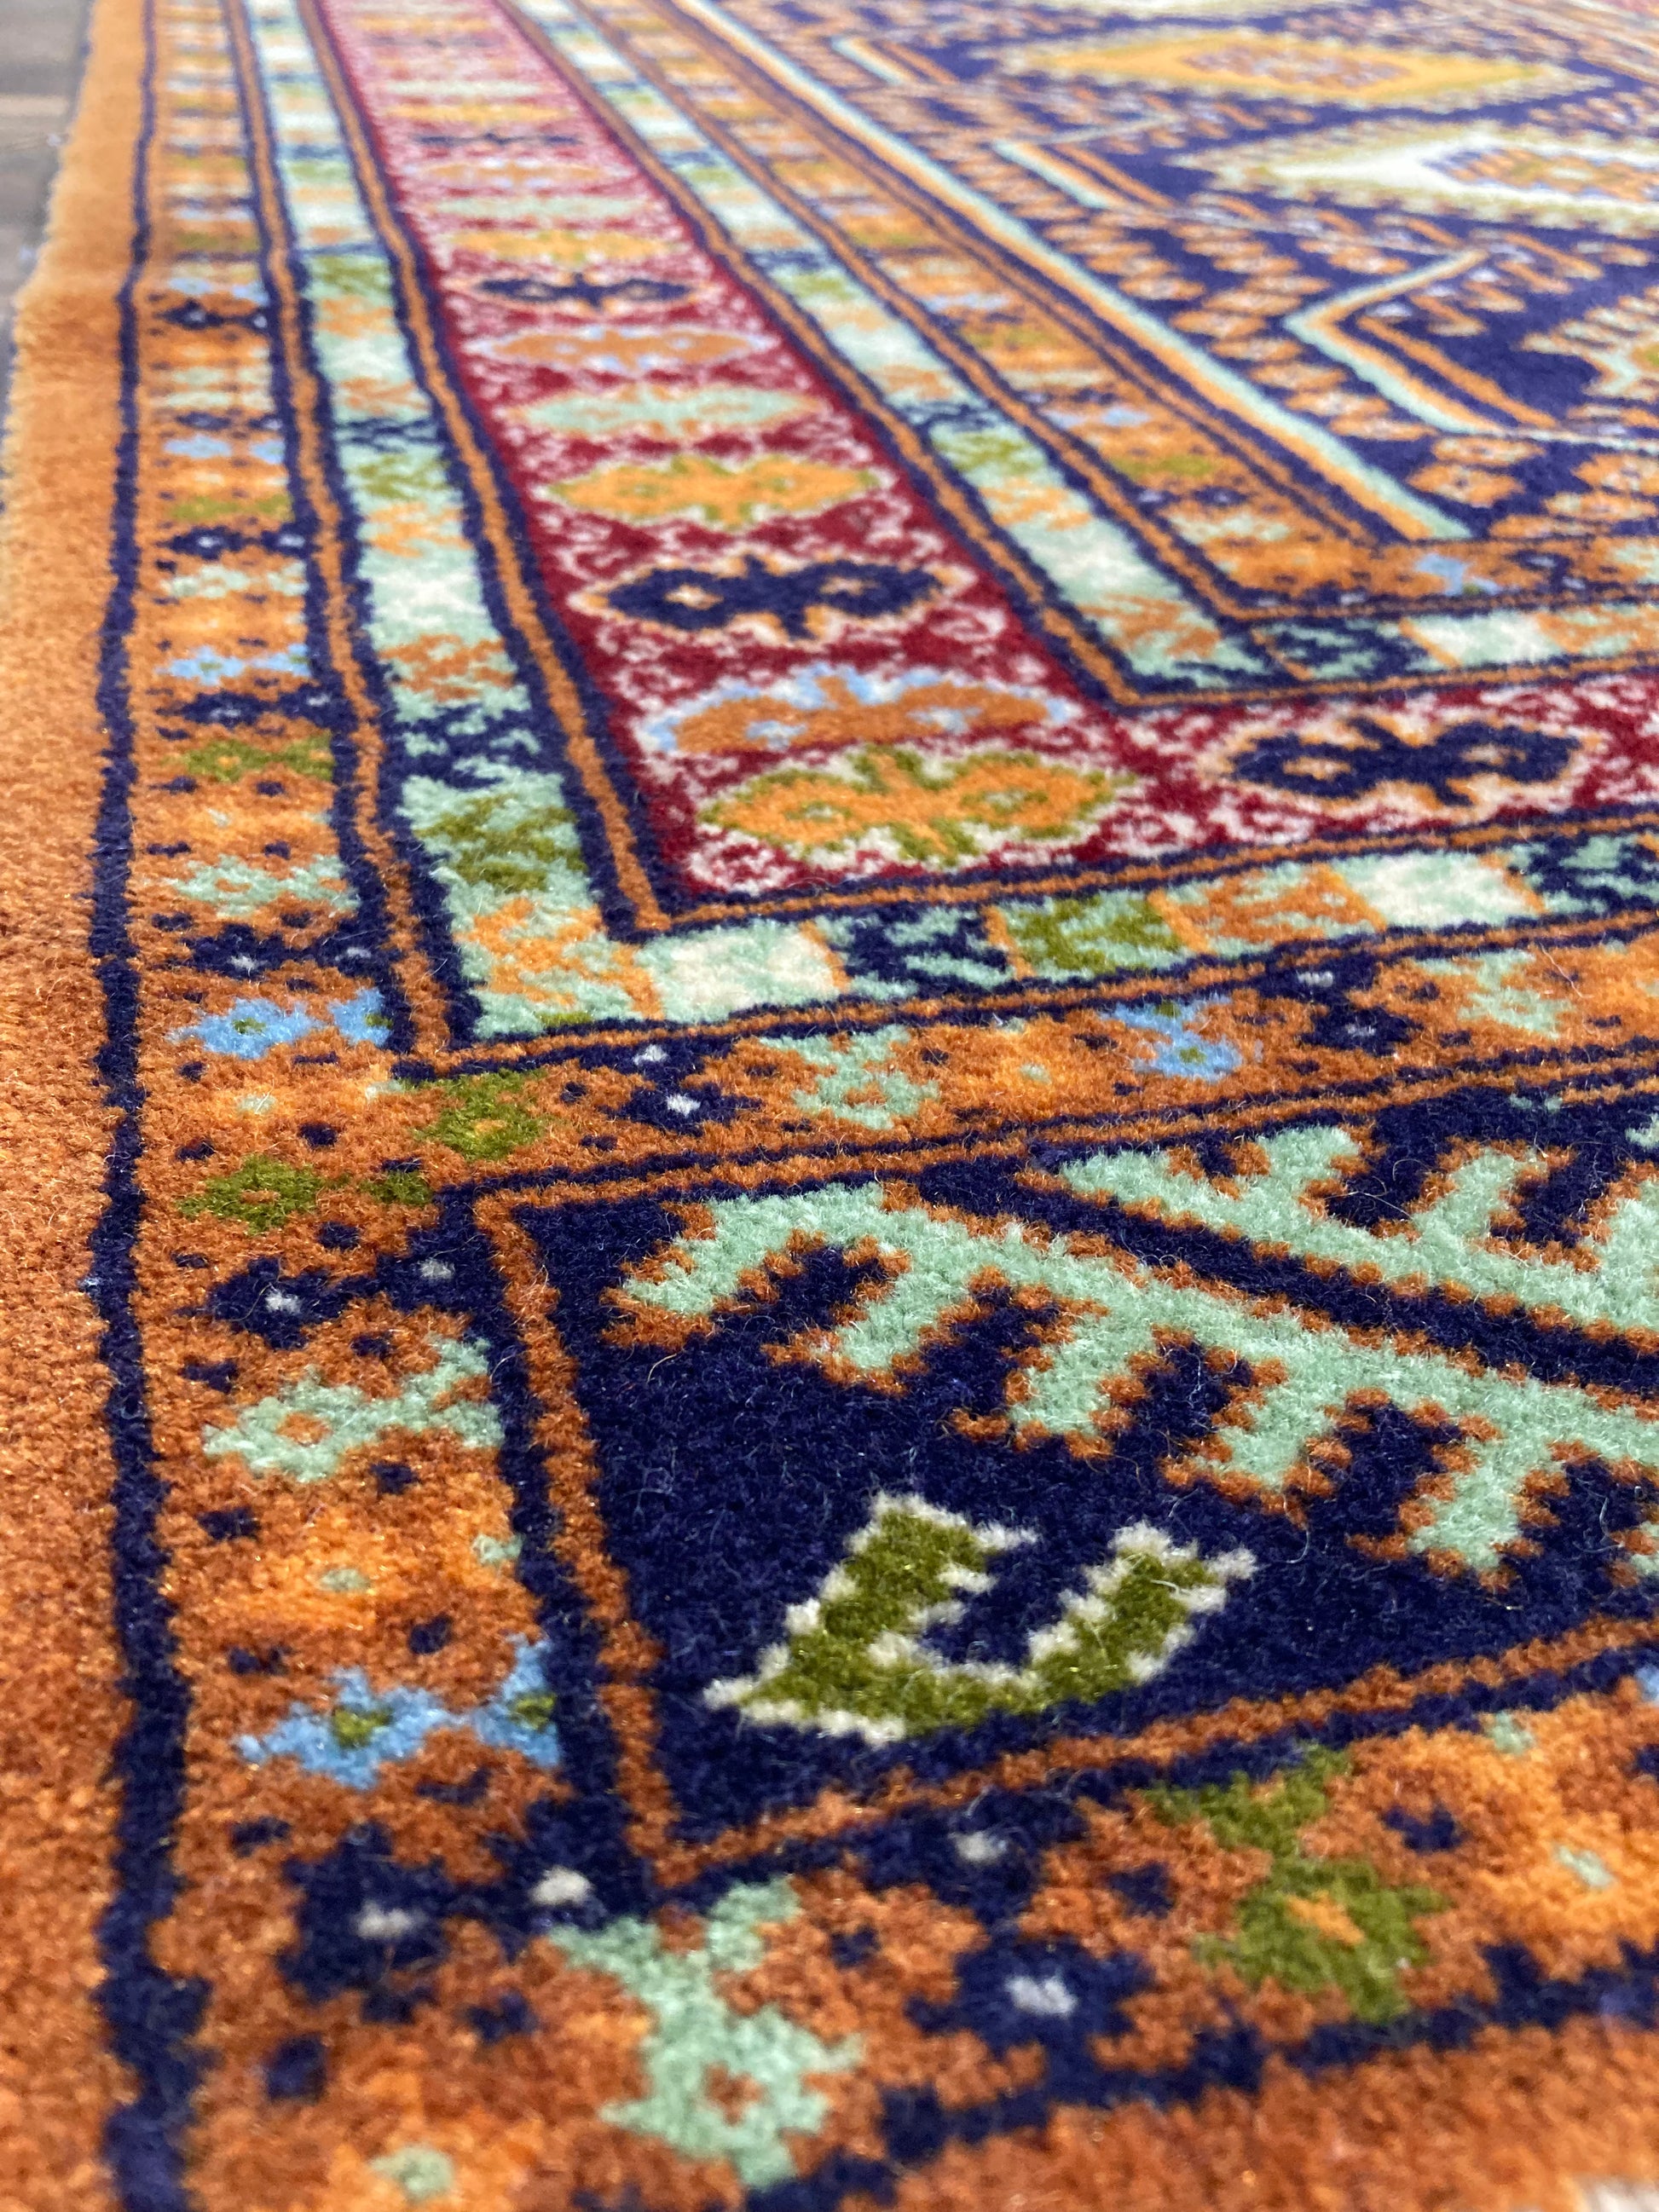 refined carpet rugs pakistan bokhara runner handmade area rug hand-knotted vintage area rug vintage runner rug orange county rug store fountain valley california